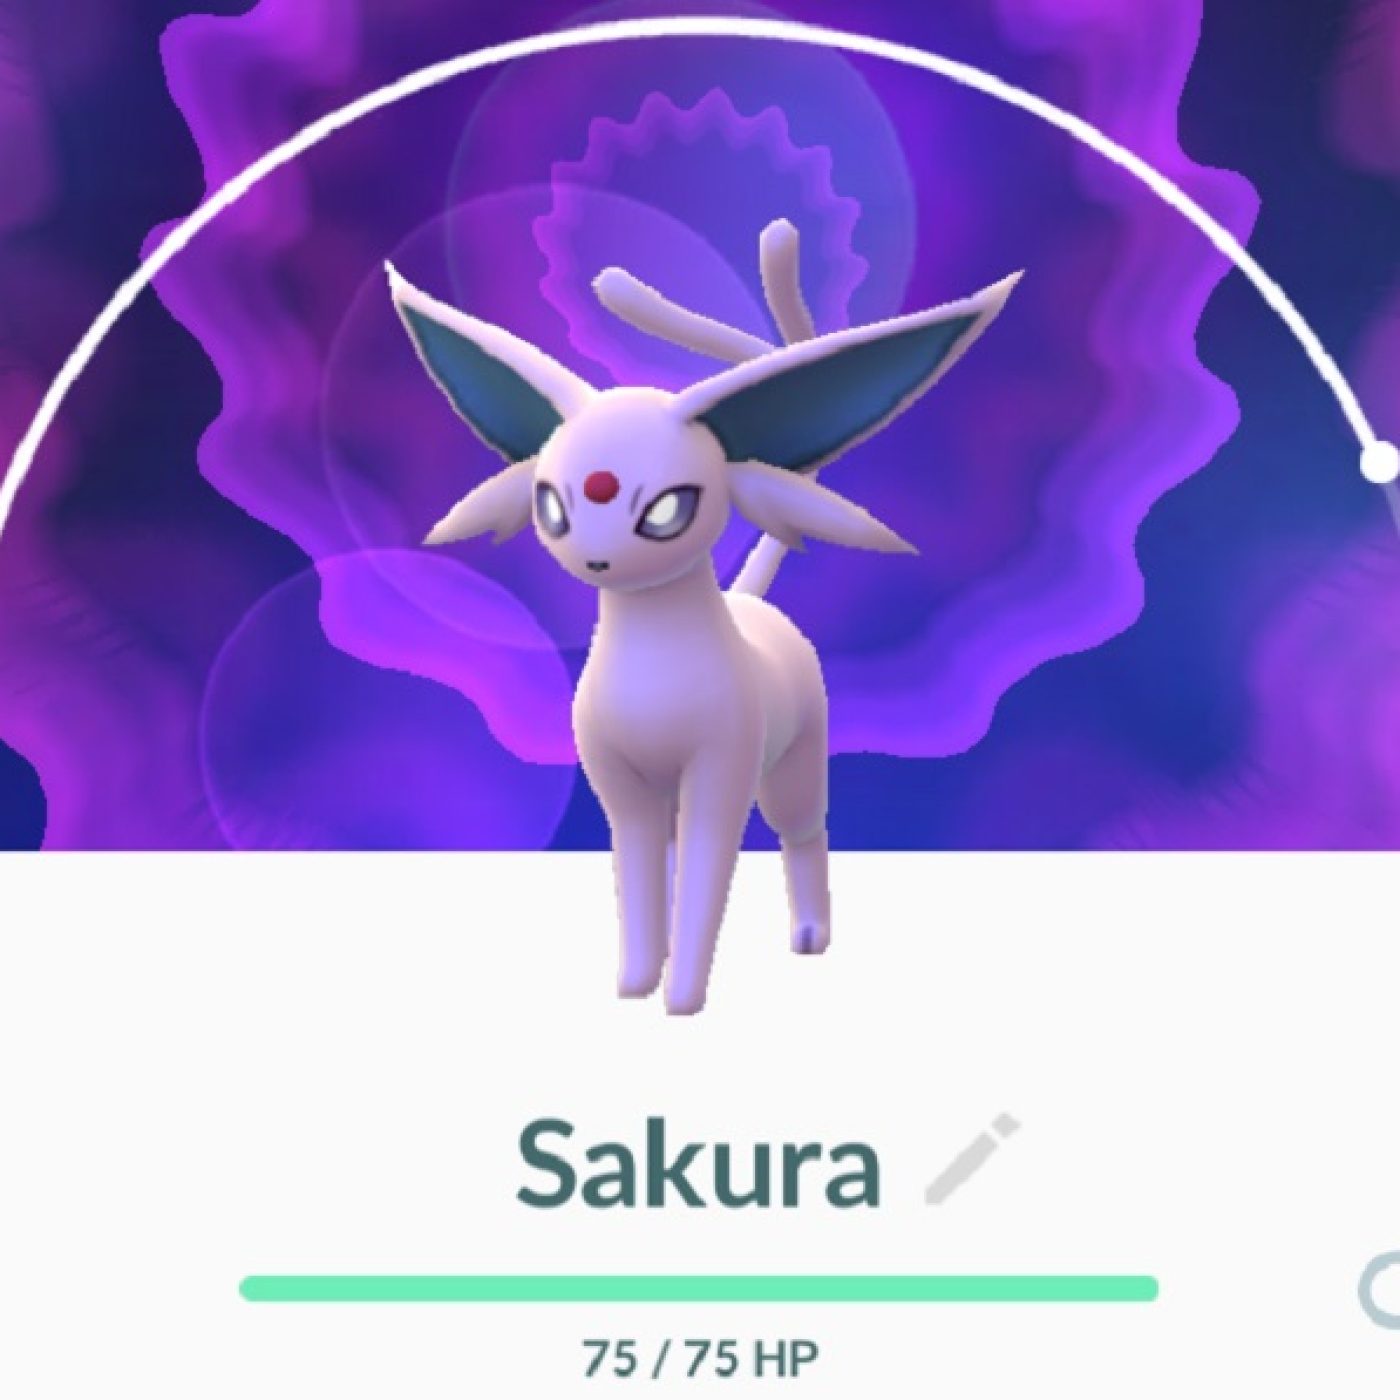 Where to find Eevee in Pokemon GO